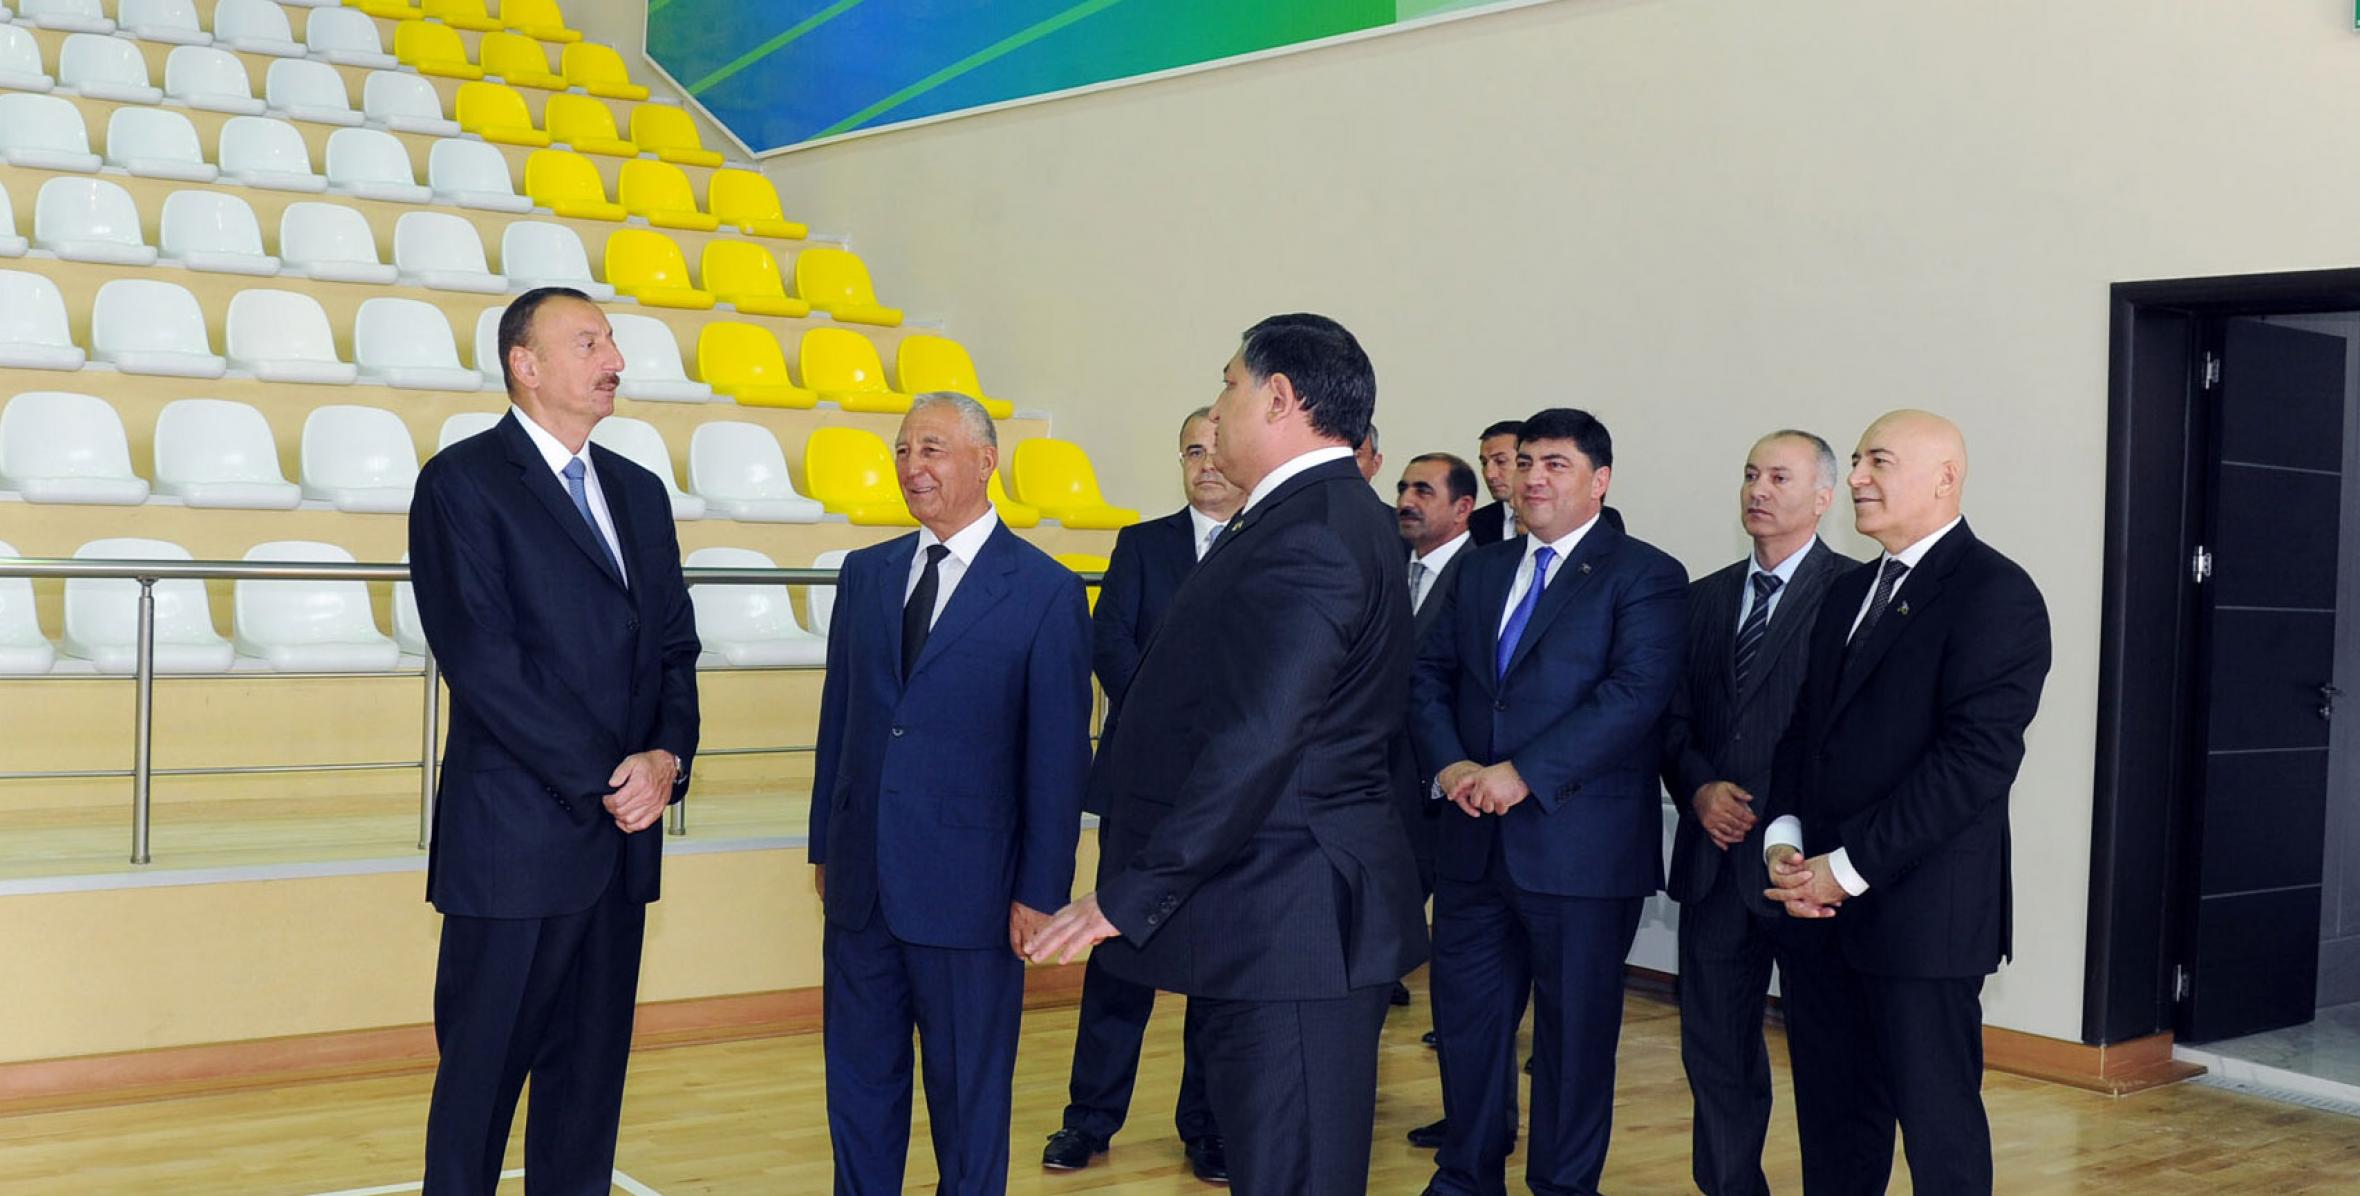 Ilham Aliyev attended the opening of the Khachmaz Olympic sports center